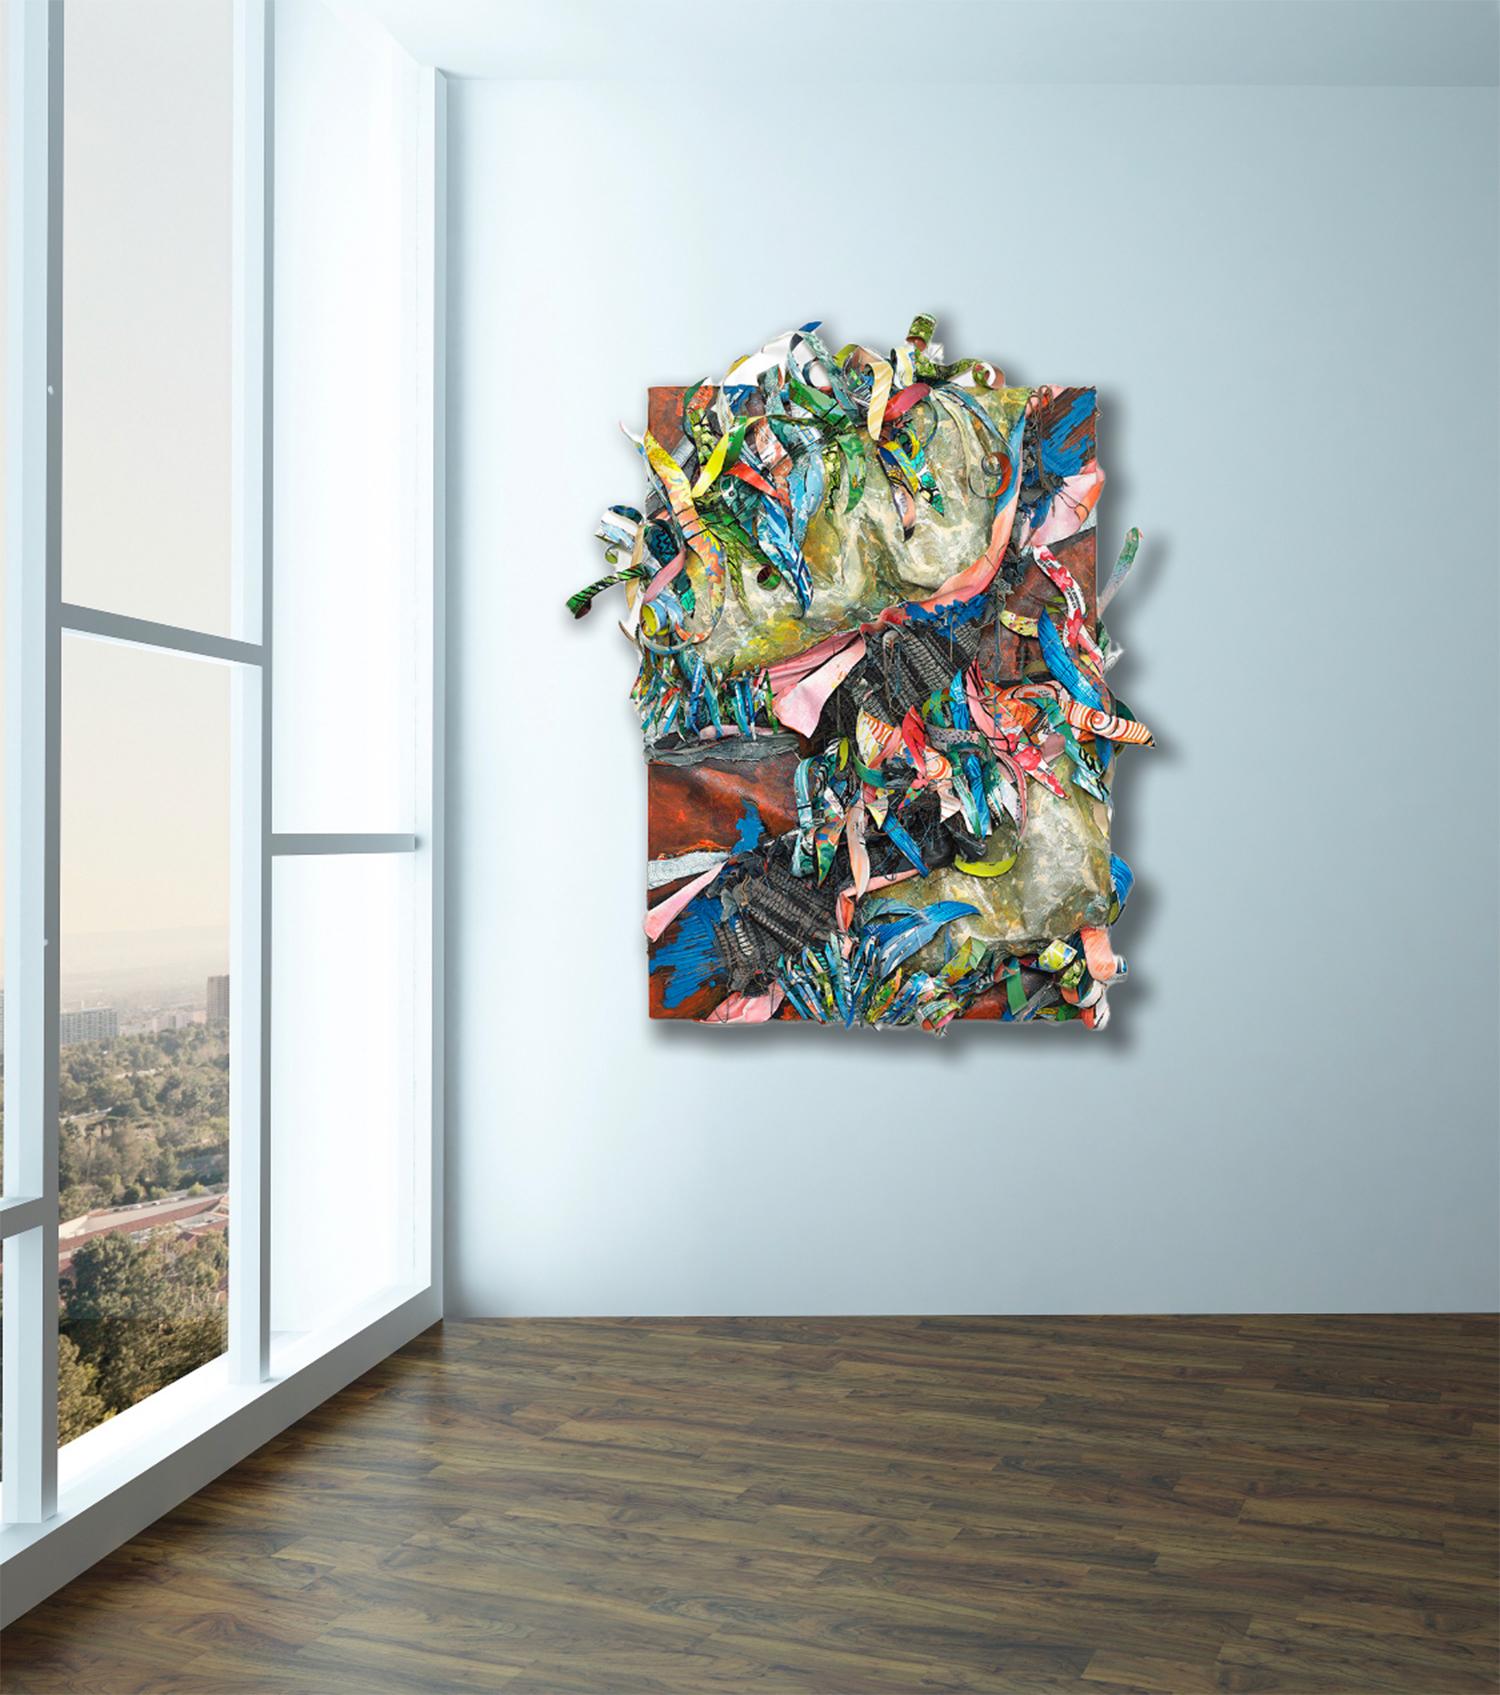 Sculptural abstract painting in red blue and green with repurposed materials - Painting by Christina Massey